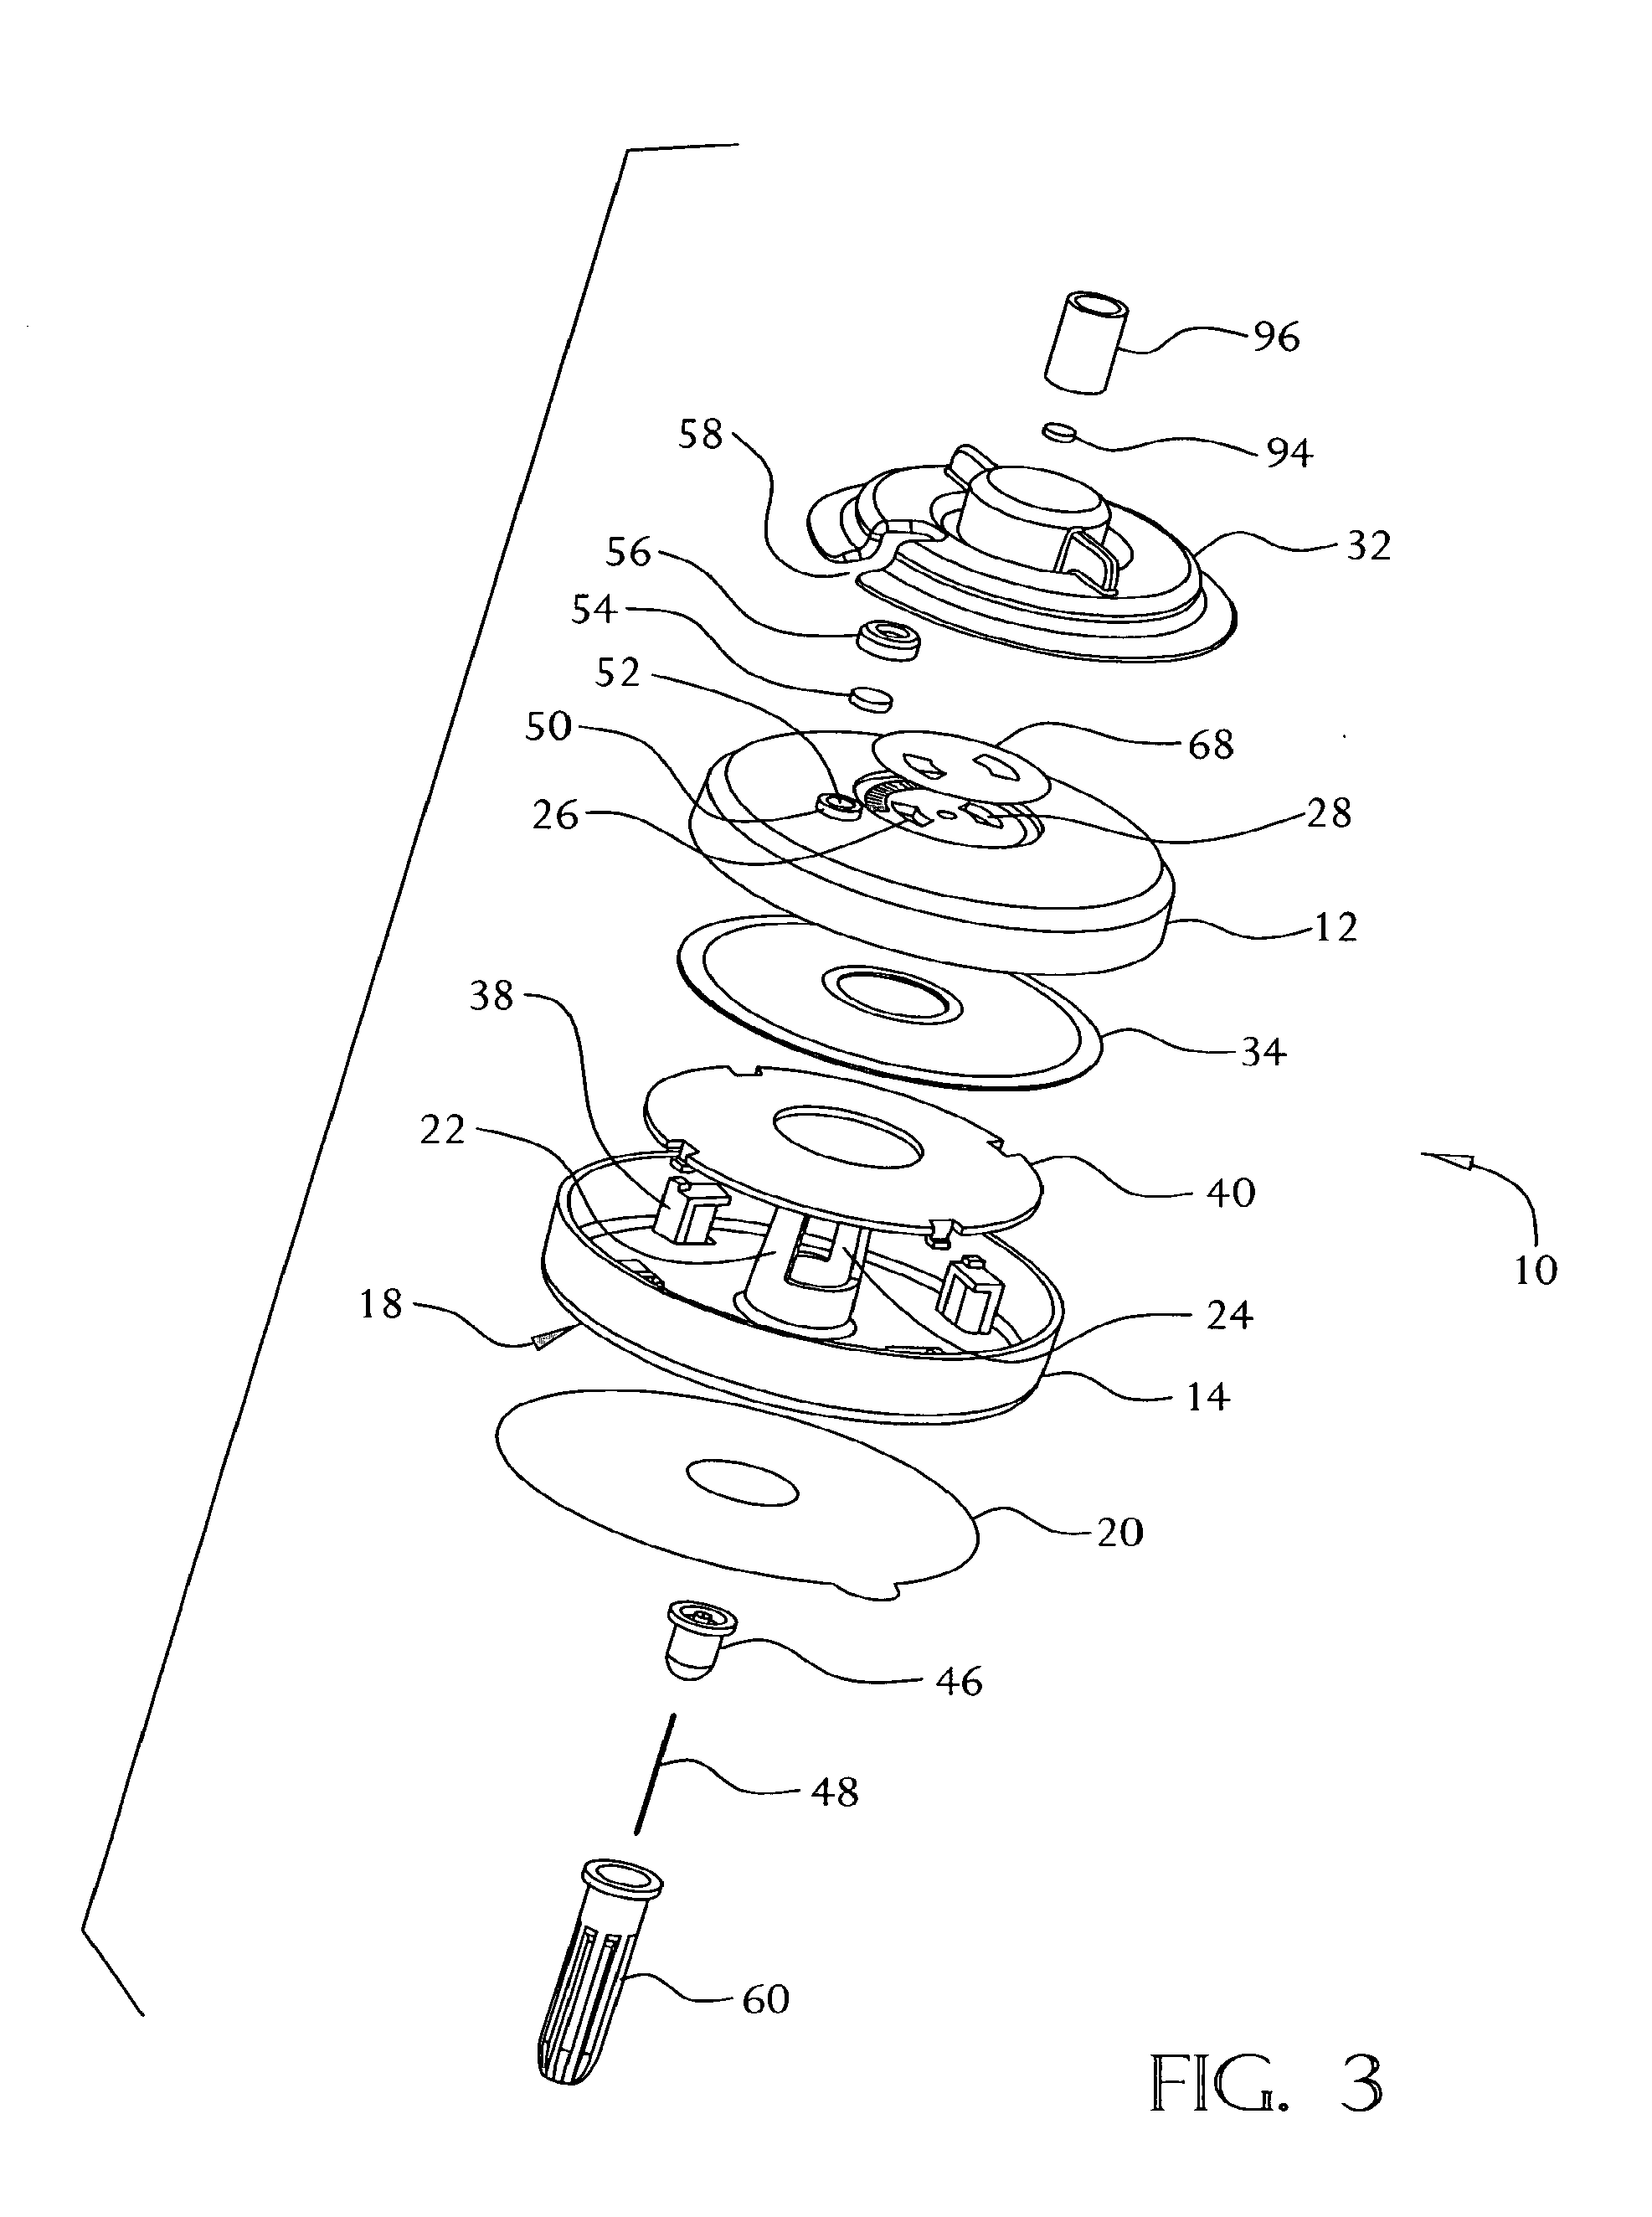 Constant rate fluid delivery device with selectable flow rate and titratable bolus button